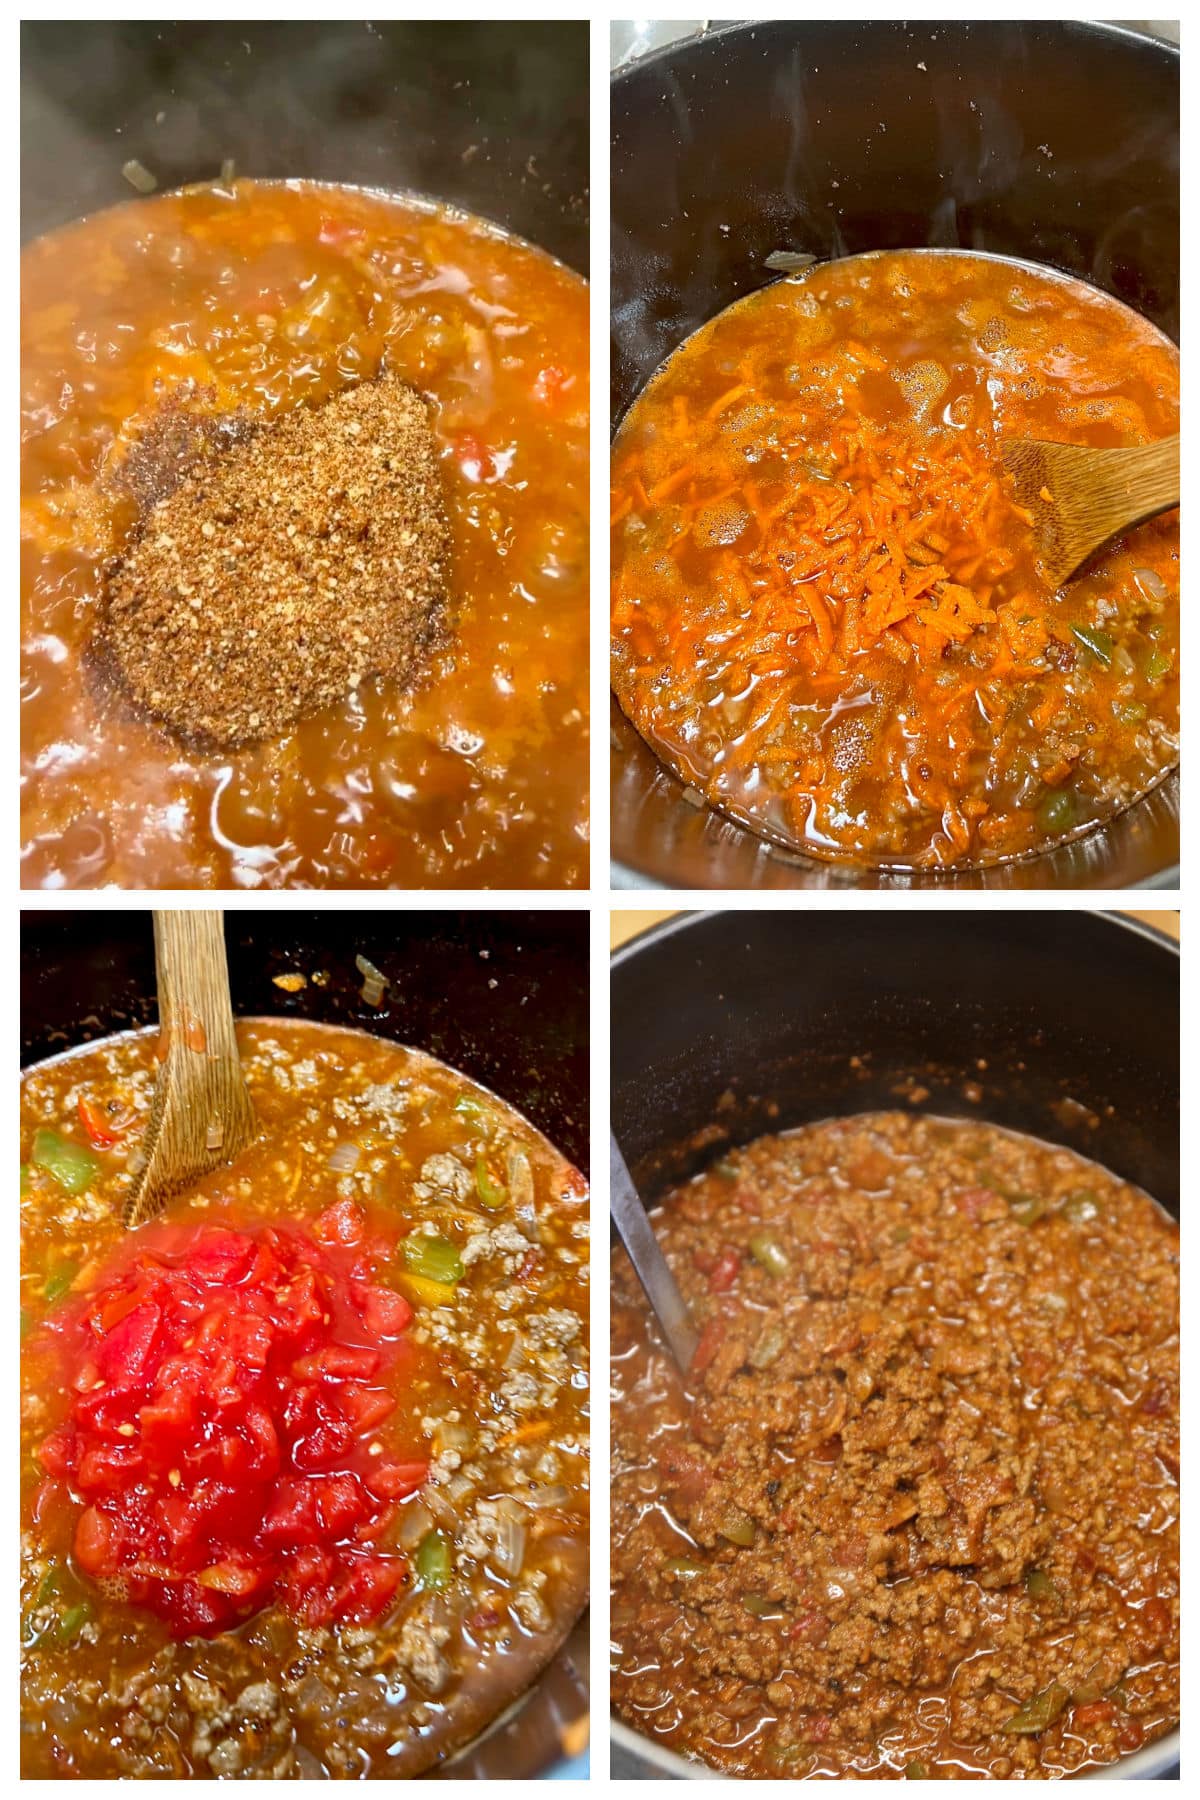 Collage making chili with diced tomatoes, ground beef.